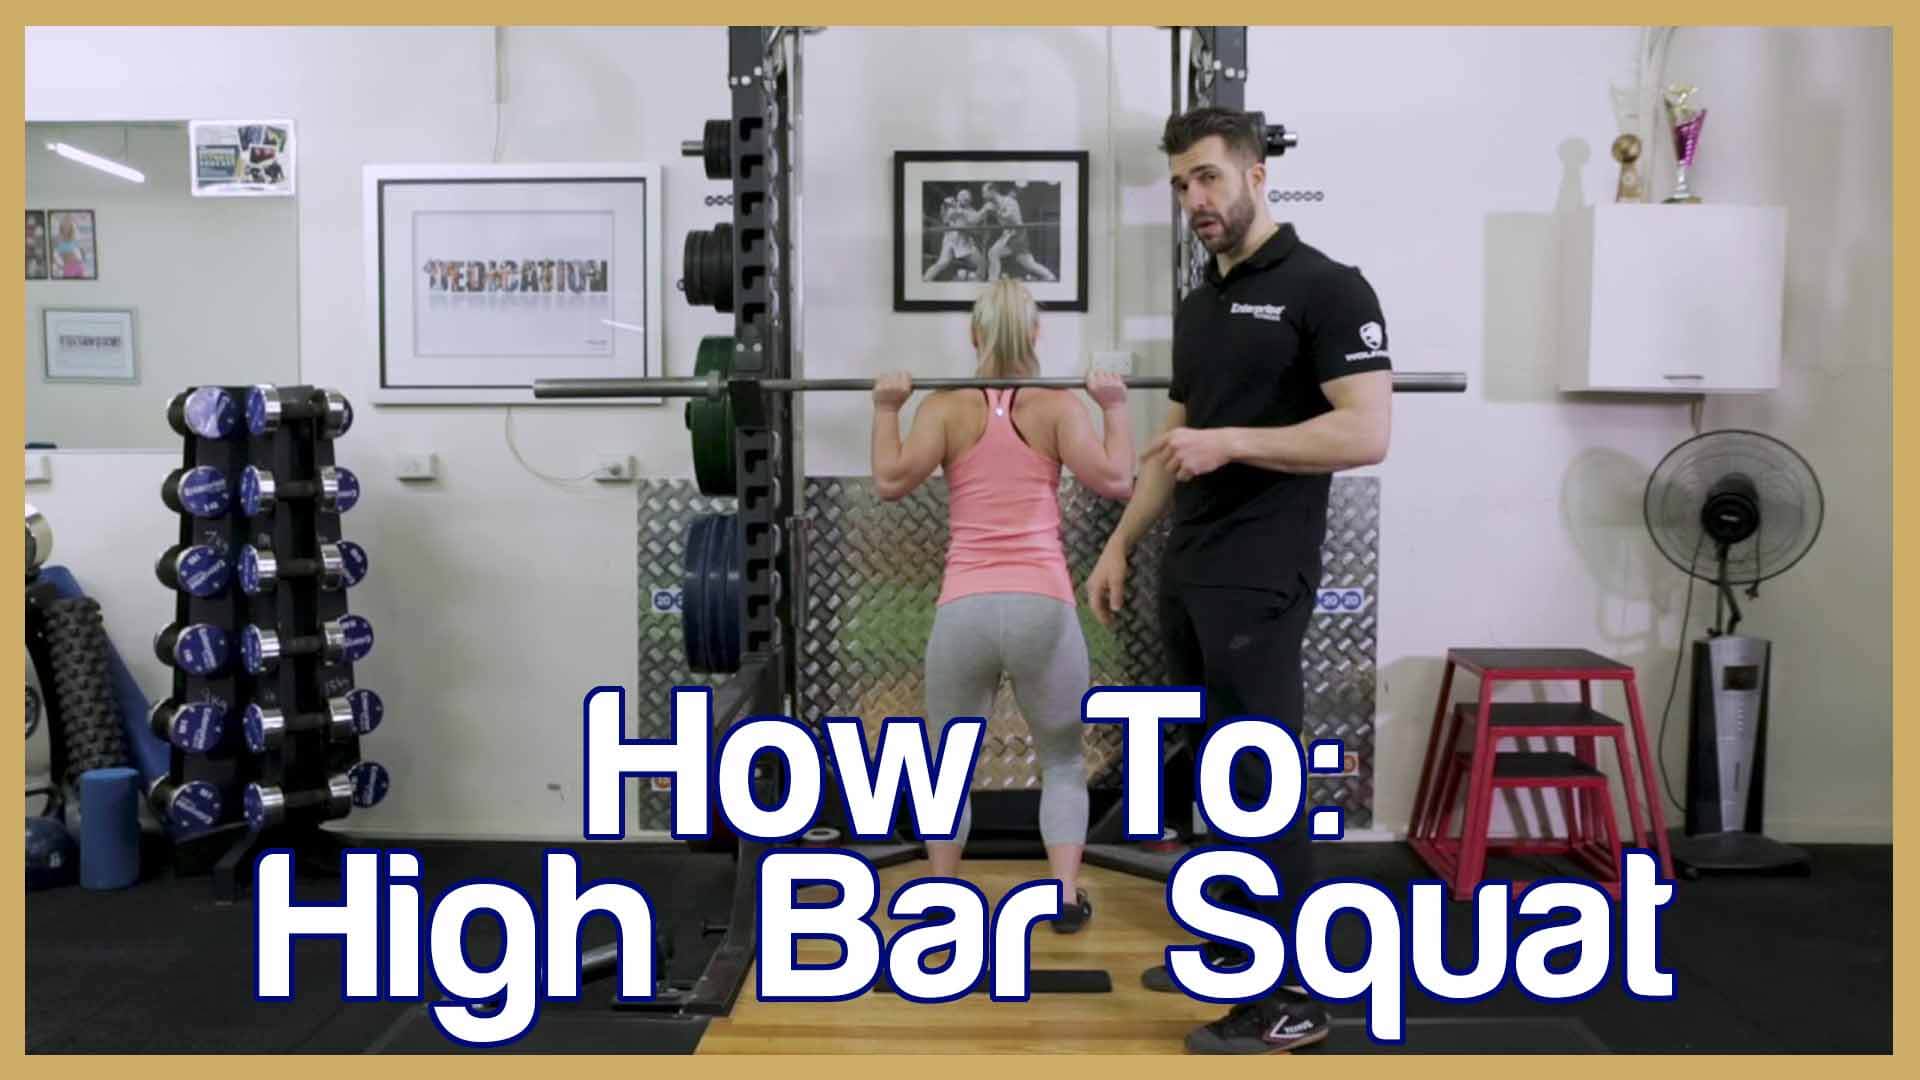 How to: High Bar Squat